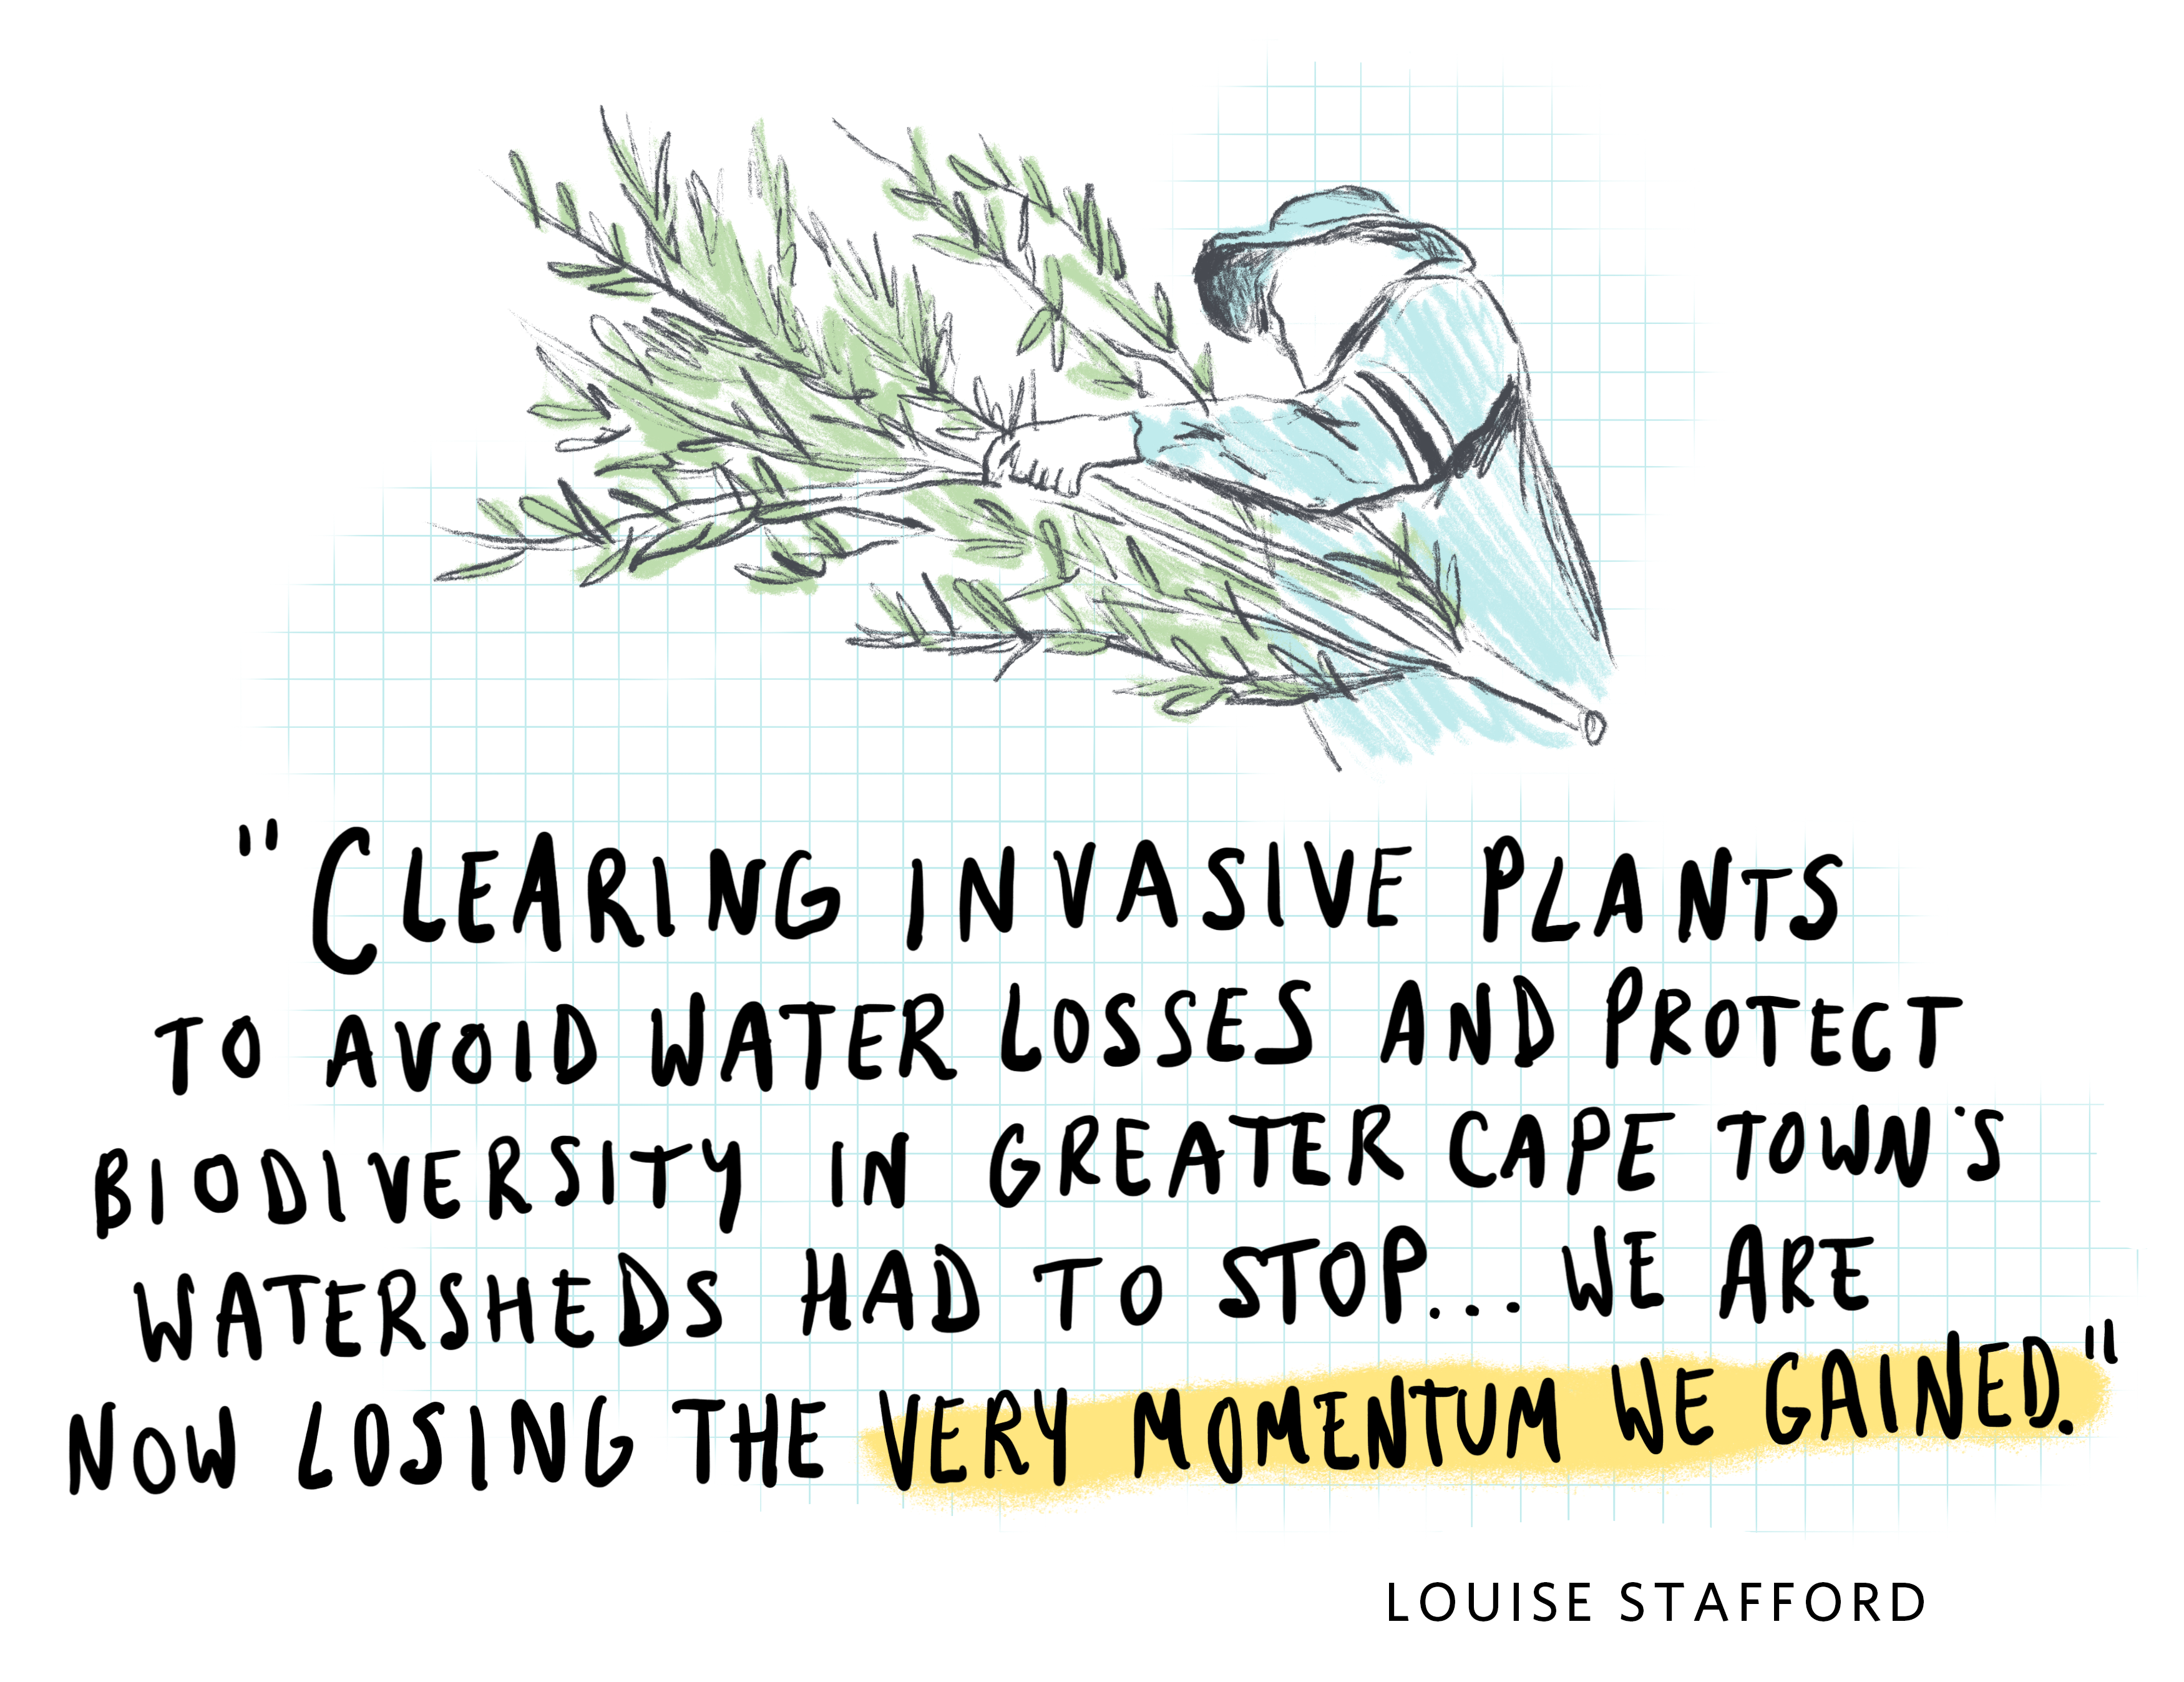 a sketchy illustration of a person carrying tree branches, with a handwritten quote underneath that says 'clearing invasive plants to avoid water losses and protect biodiversity in greater Cape Town's watersheds had to stop...we are now losing the very momentum we gained.'